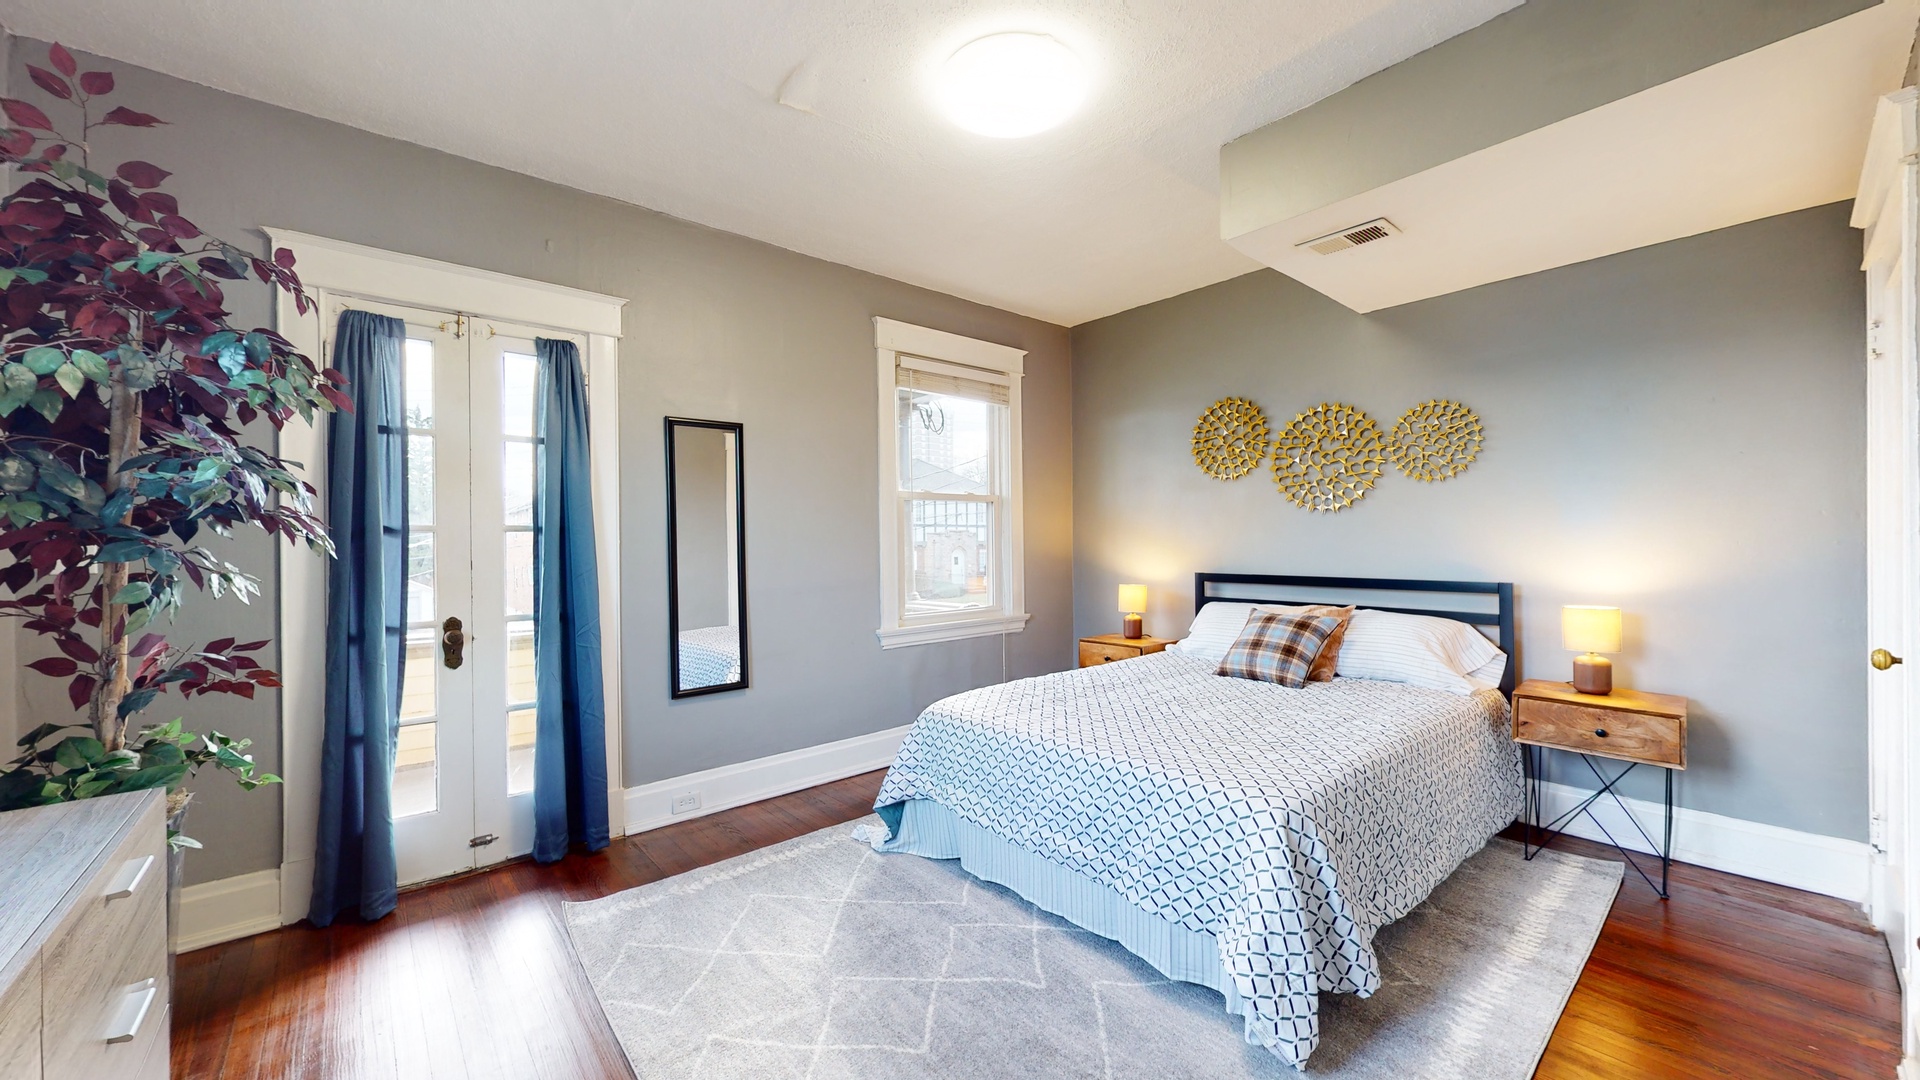 Cityscape tranquility awaits in the master bedroom, with a chic queen bed & private balcony